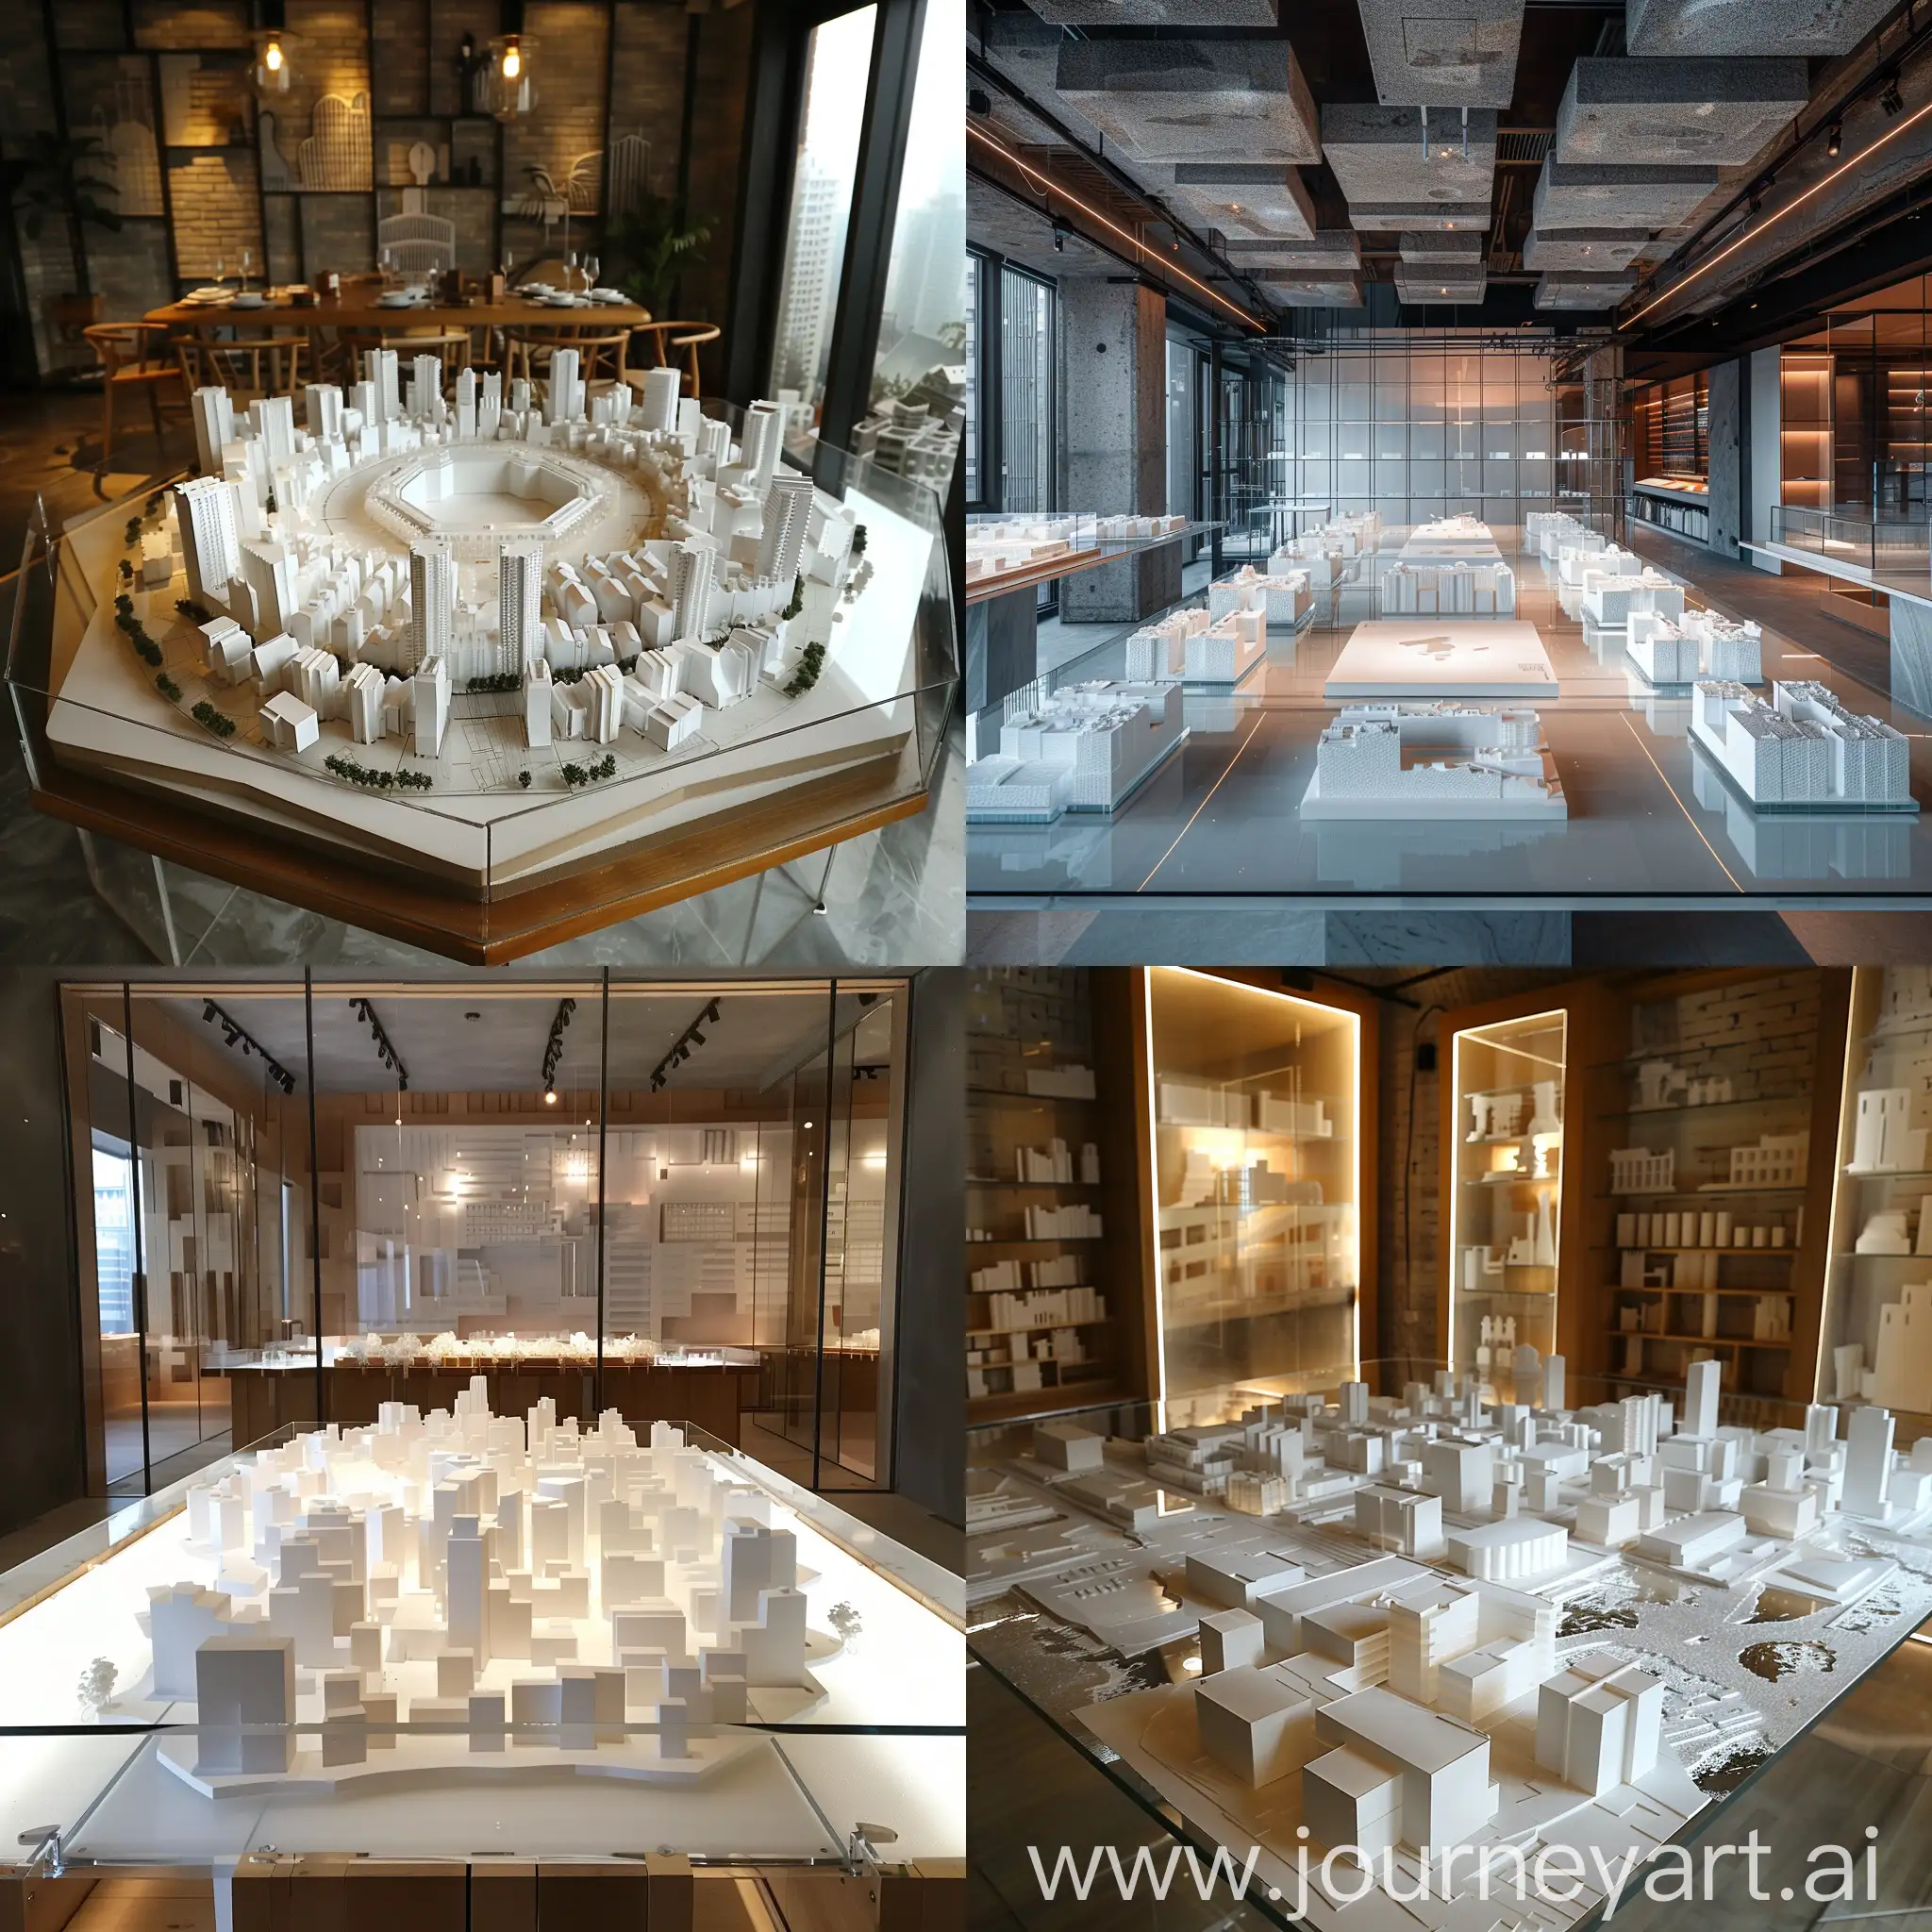 inside of the 70 squad meter room with big table center of it with white urban scale model (maket) surrounded with glass for the table surface , design interior of room so modern and avengard